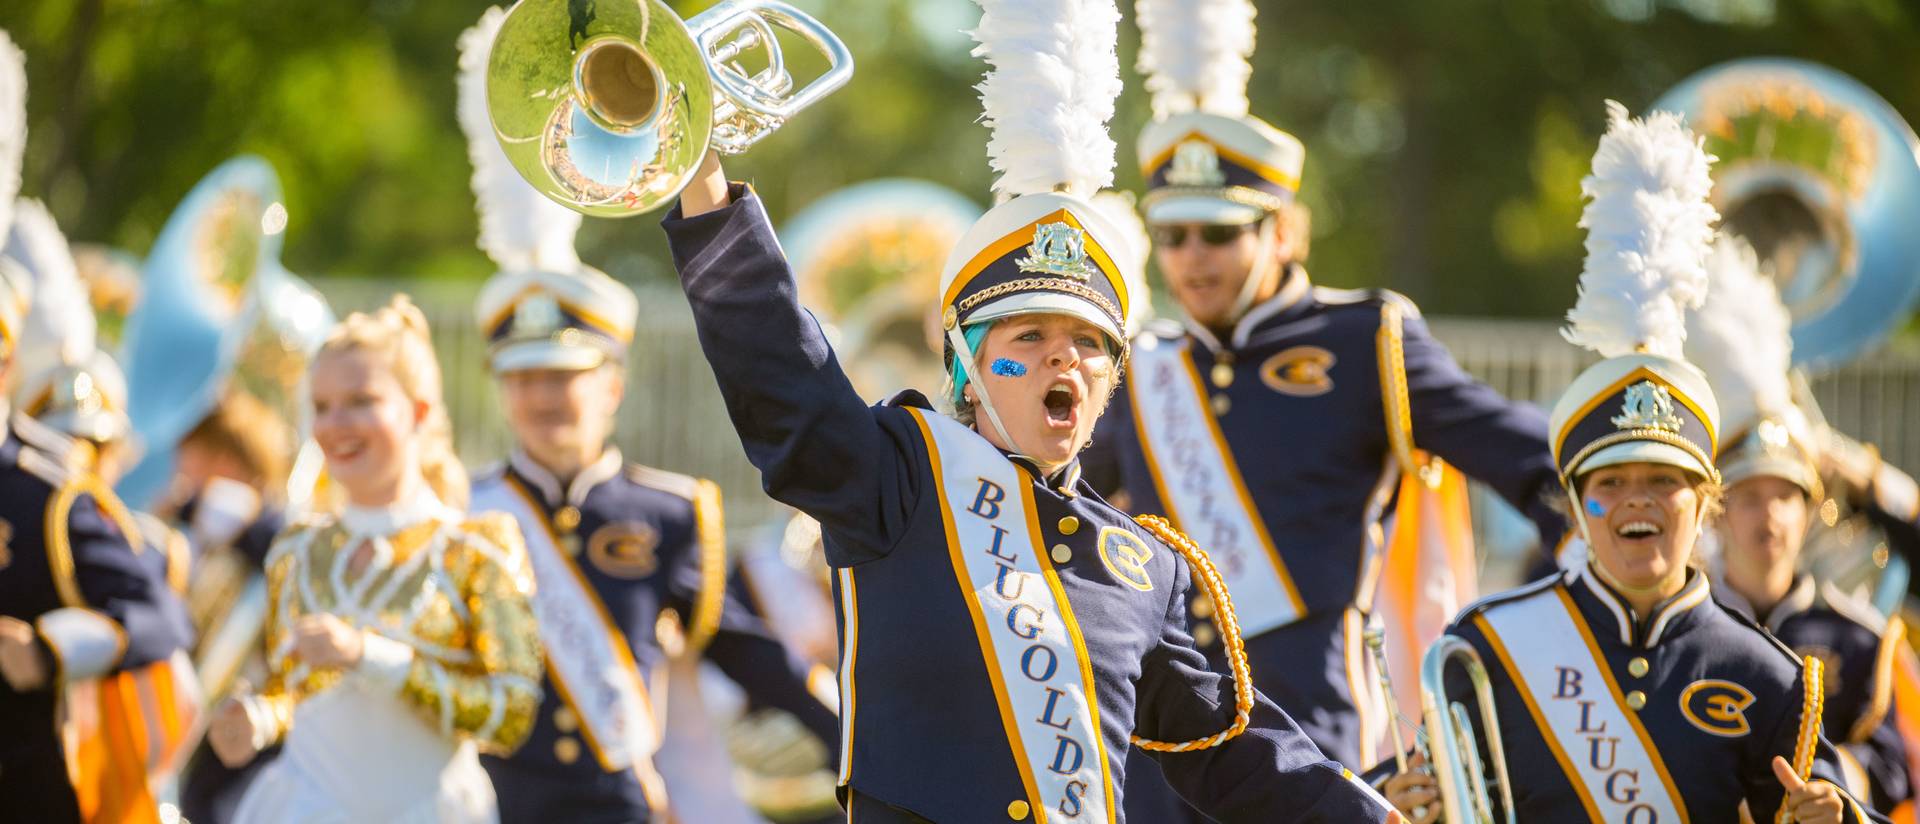 Scenes from the UWEC football game, including the Blugold Marching Band (BMB).